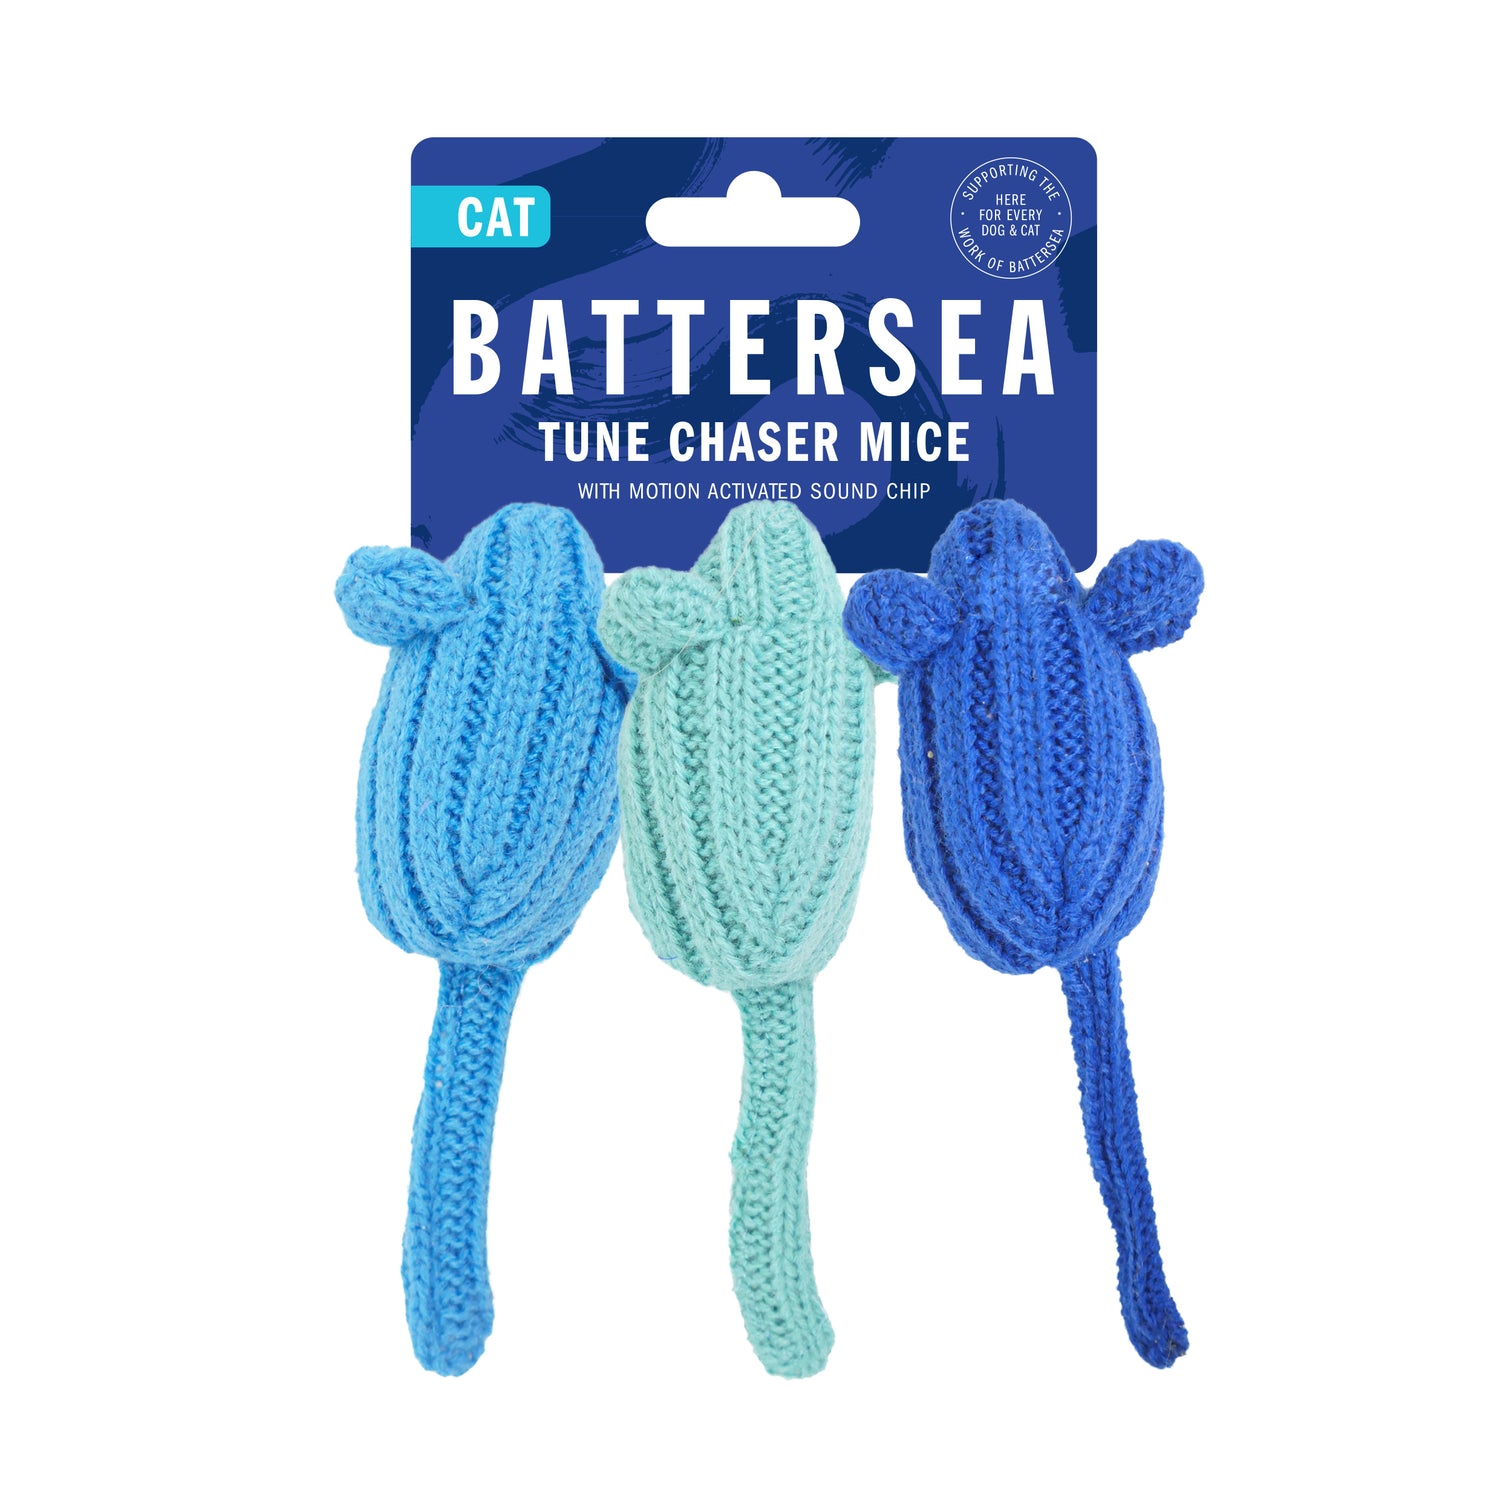 Battersea Tune Chaser Mice 3pc Cat Toy, cat toy, battersea toy, rosewoodXbattersea, battersea, cat stimulation, cat enrichment